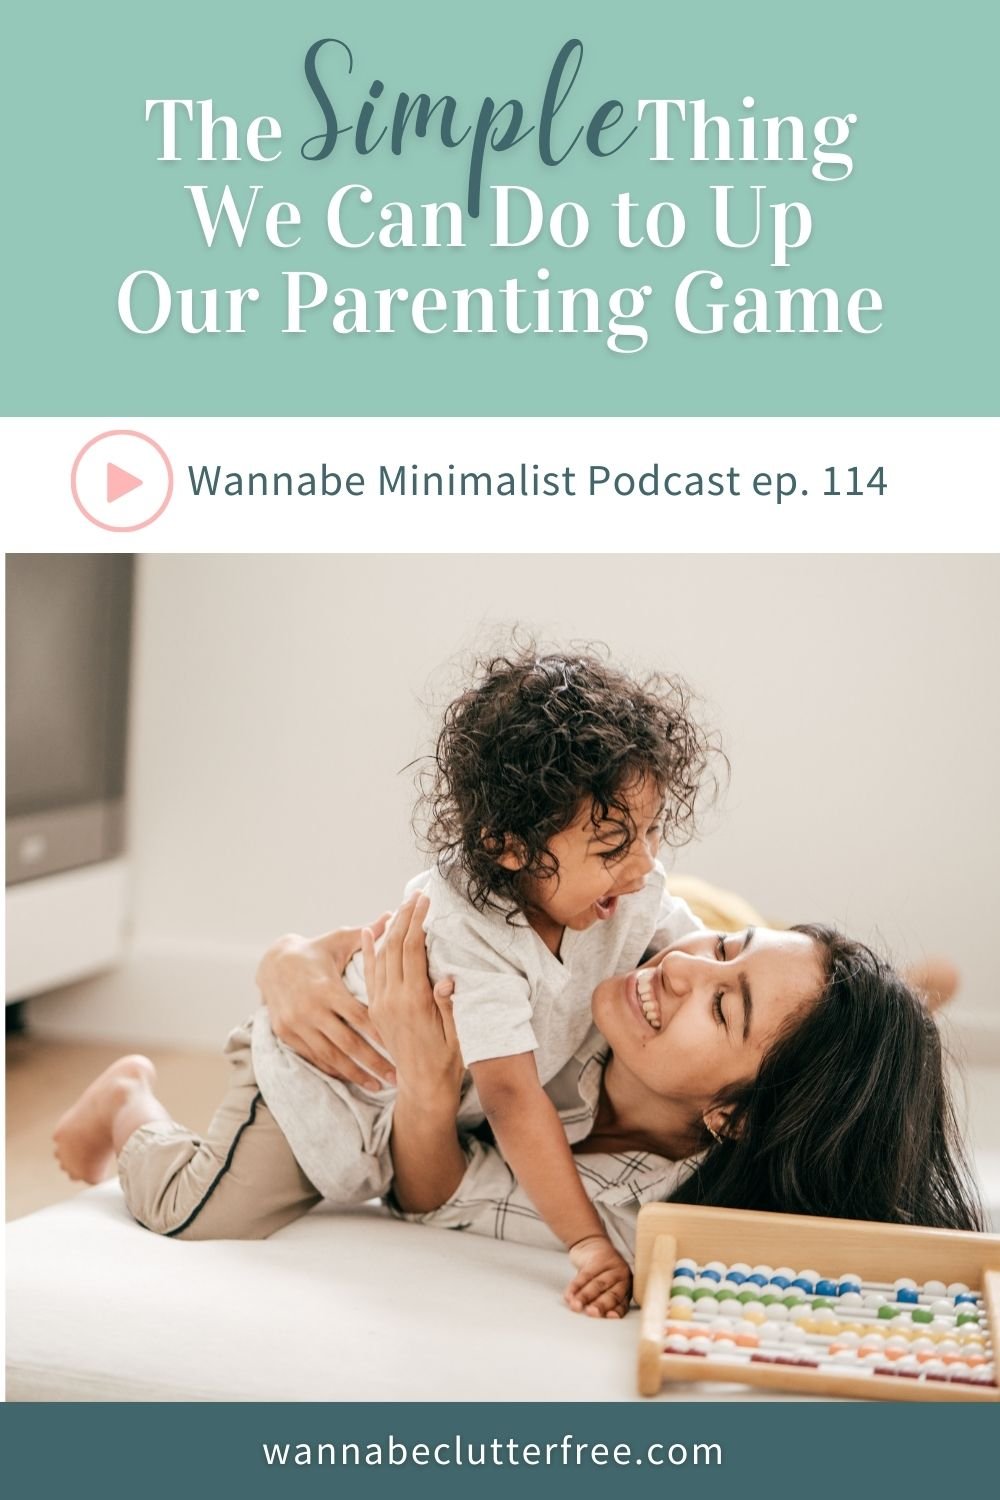 The simple things we can do to up our parenting game